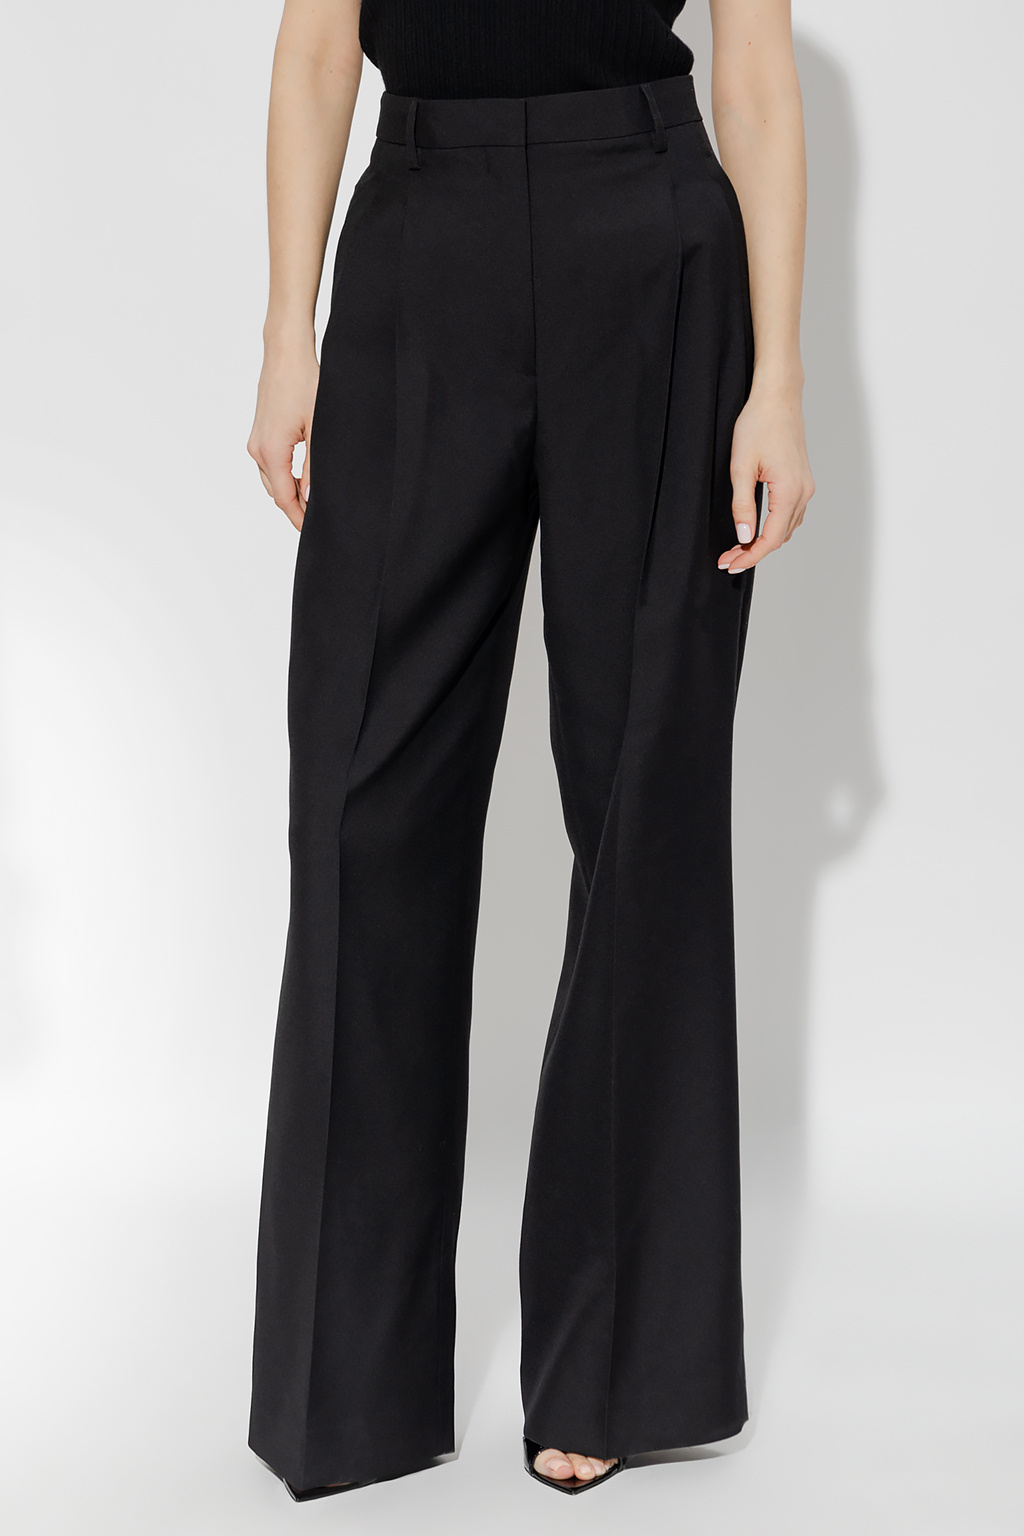 Burberry ‘Madge’ pleat-front trousers